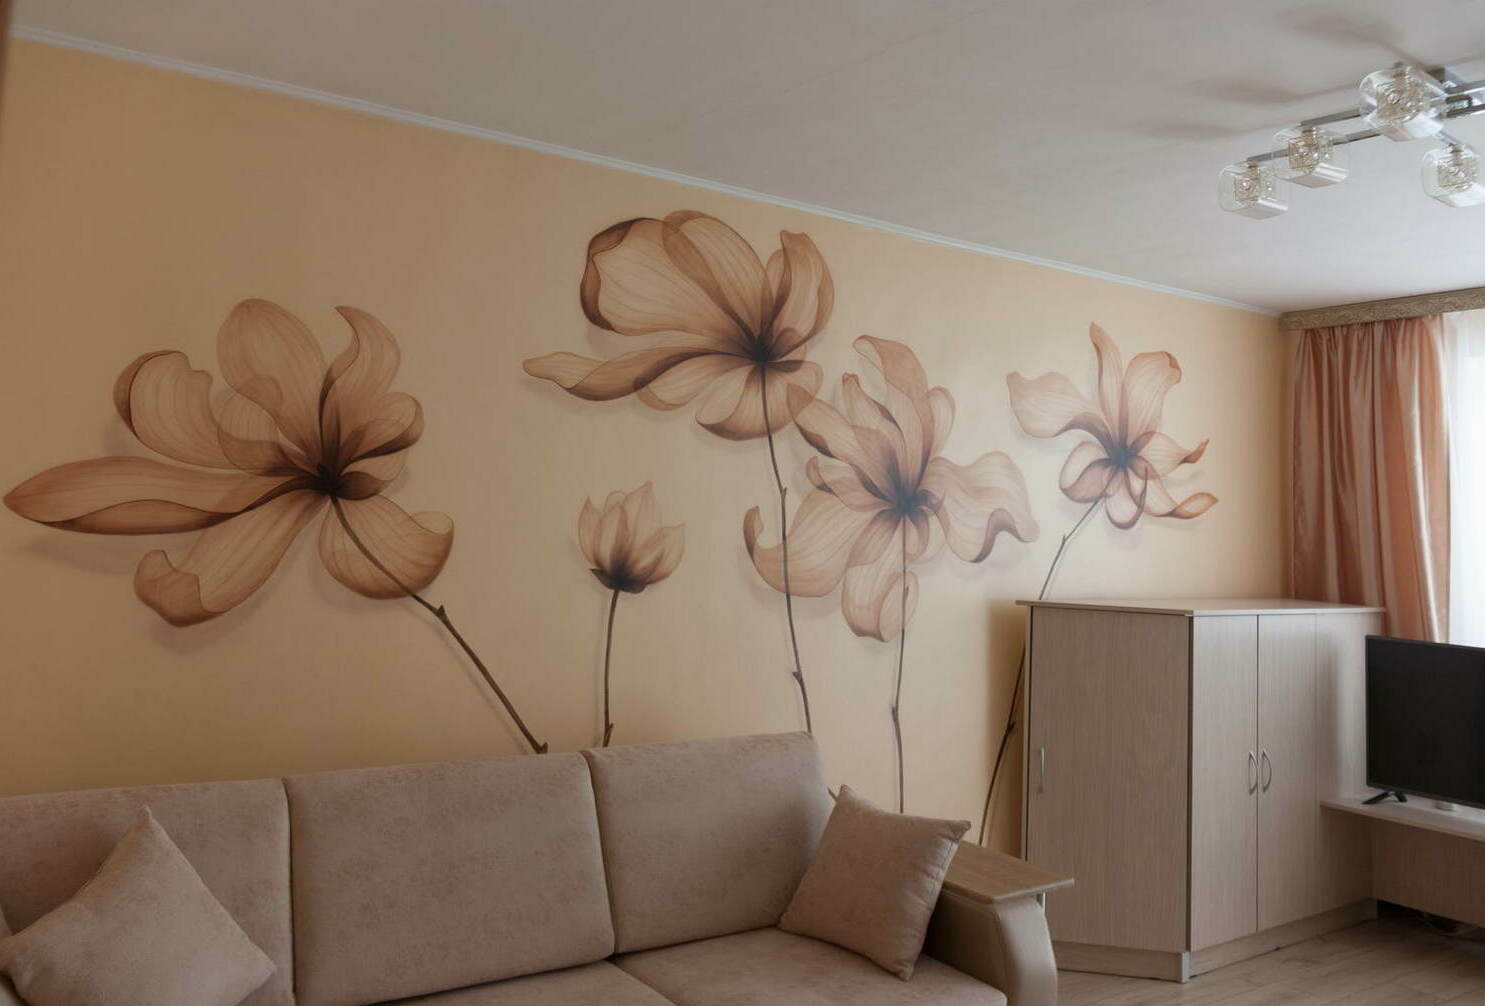 mural in the living room 3D flowers on the wall